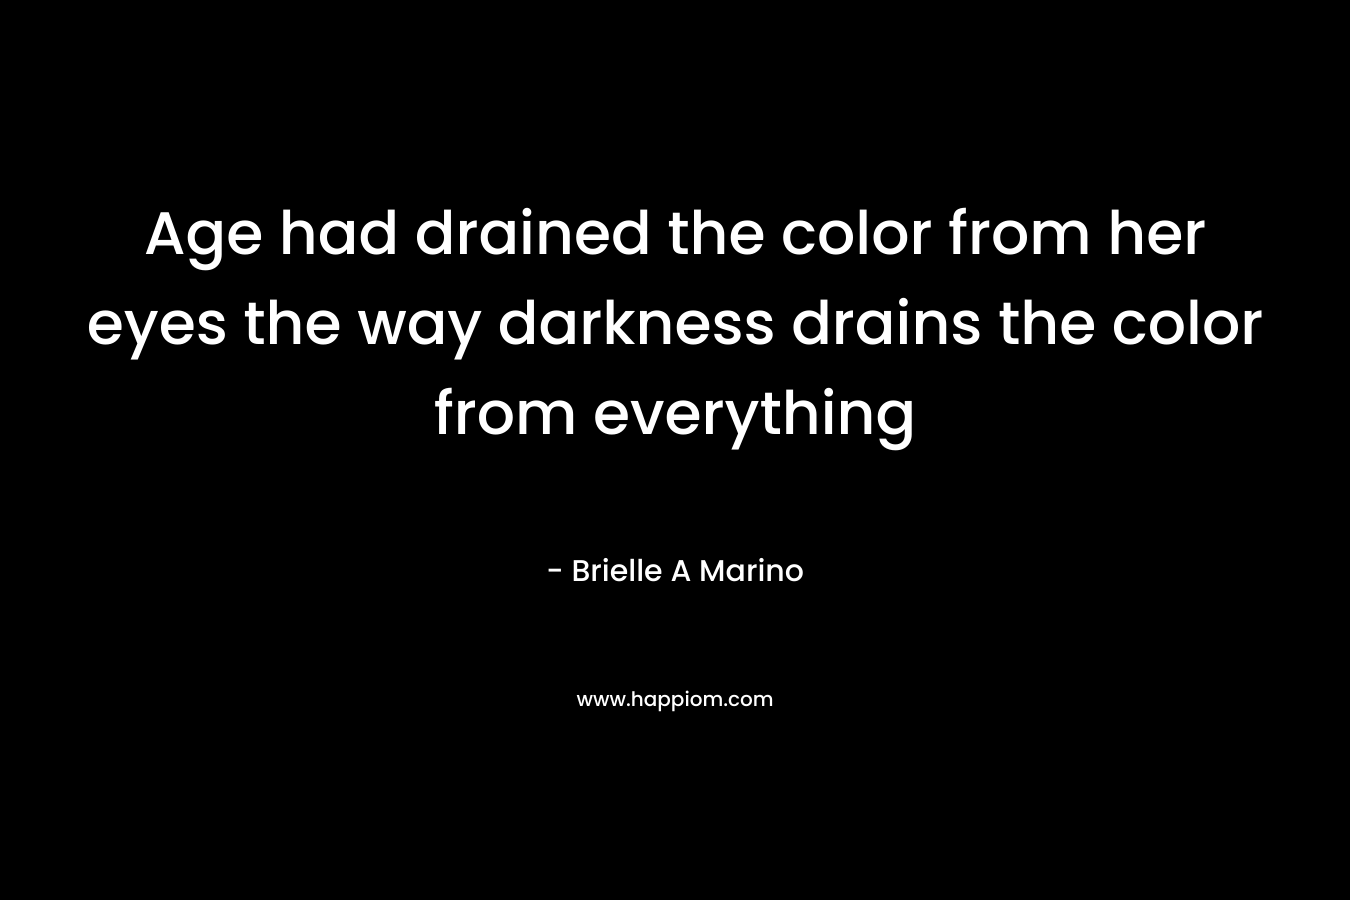 Age had drained the color from her eyes the way darkness drains the color from everything – Brielle A Marino